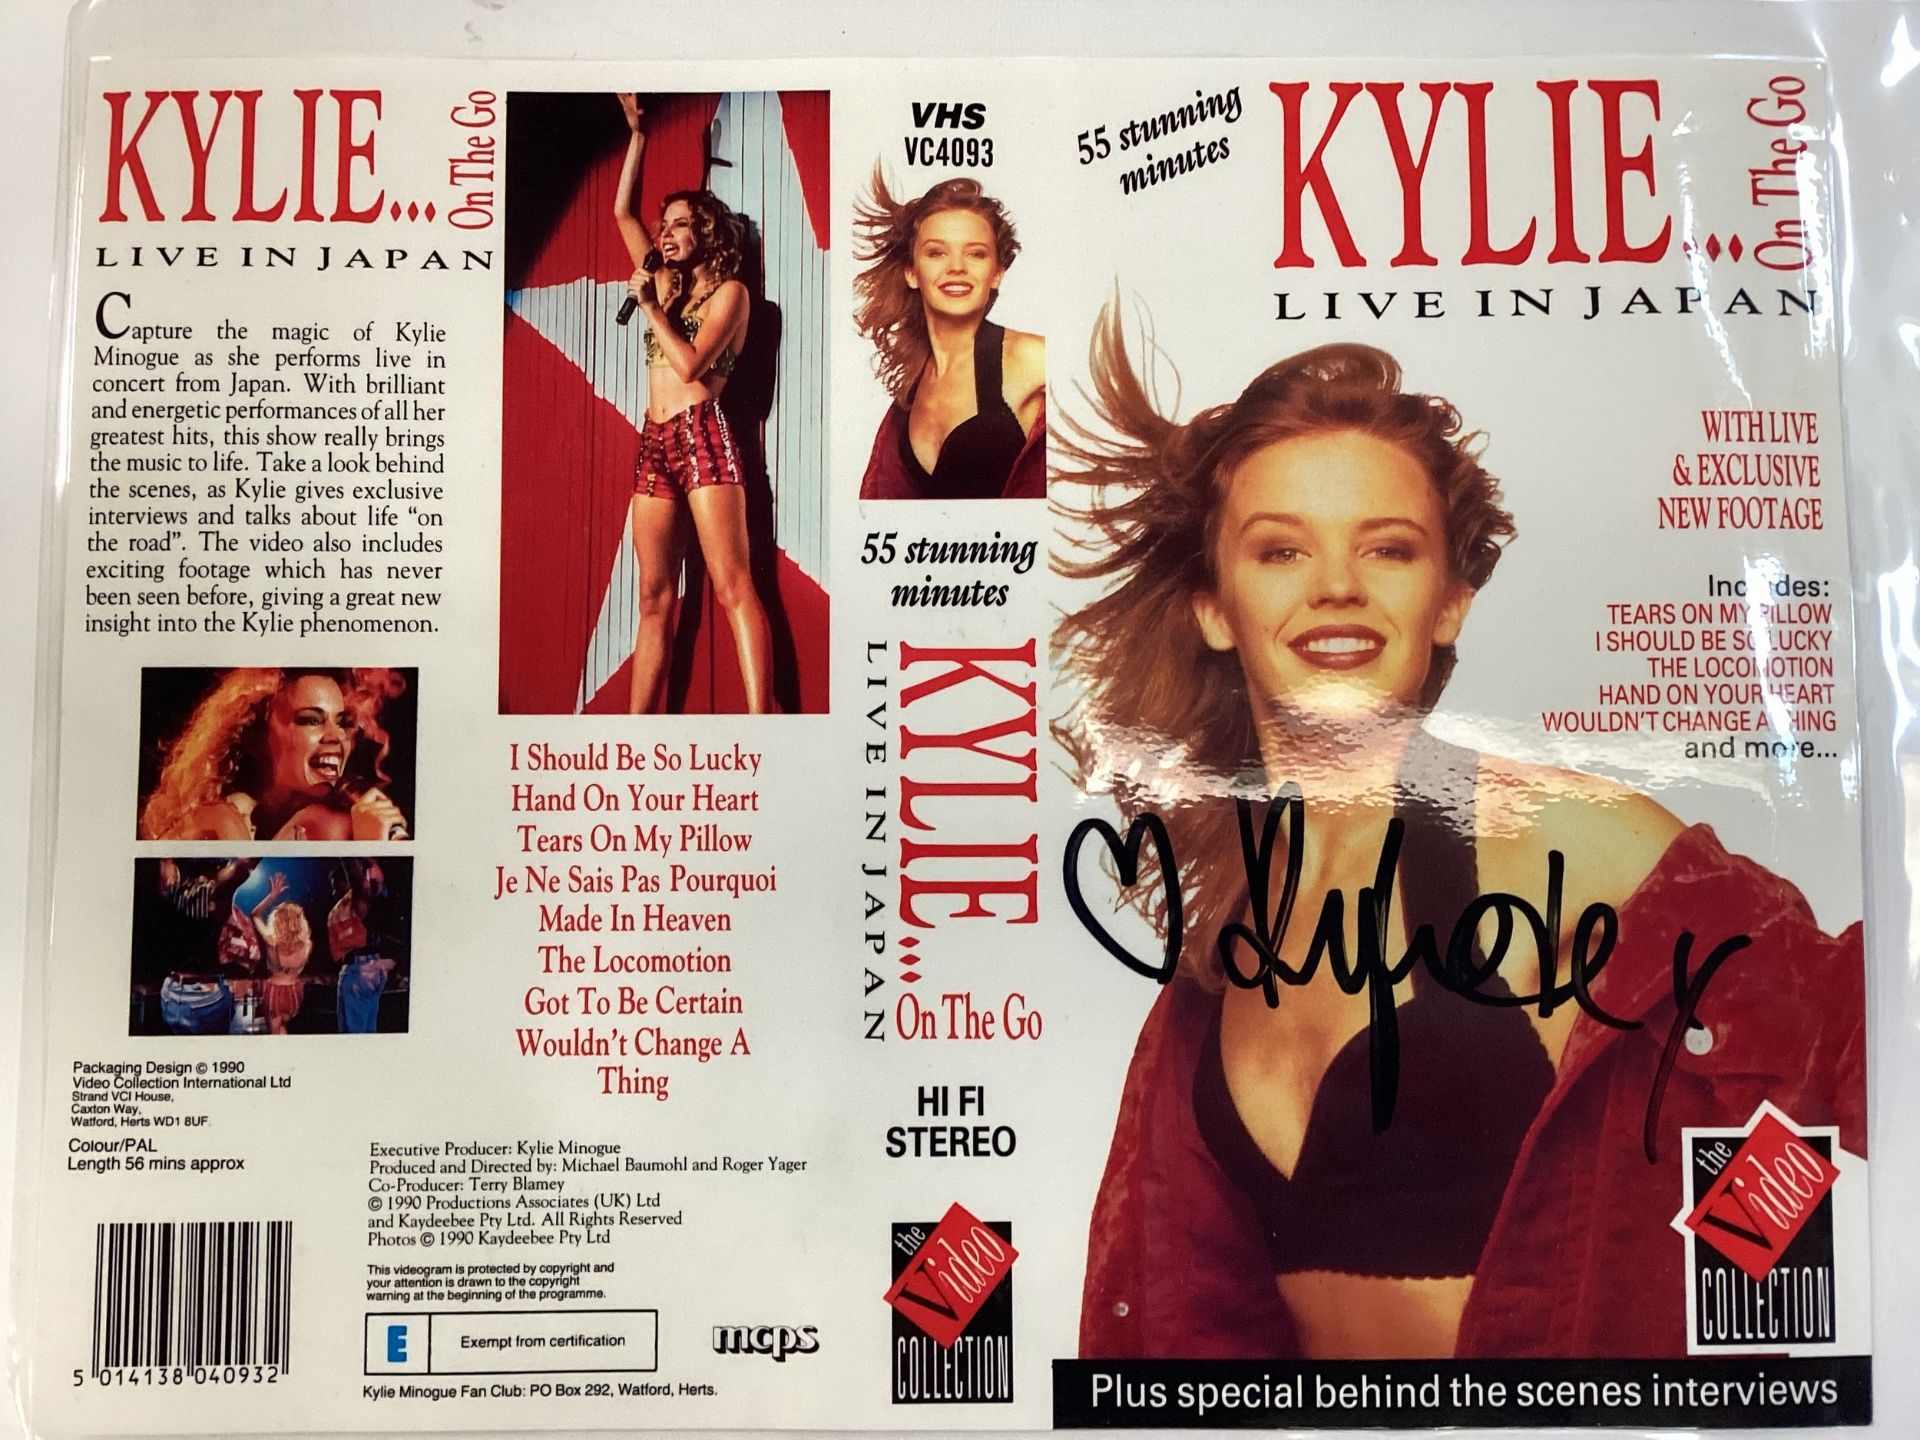 SIGNED KYLIE MINOGUE VIDEO SLEEVE. This is an original Kylie autograph found here on a cover of